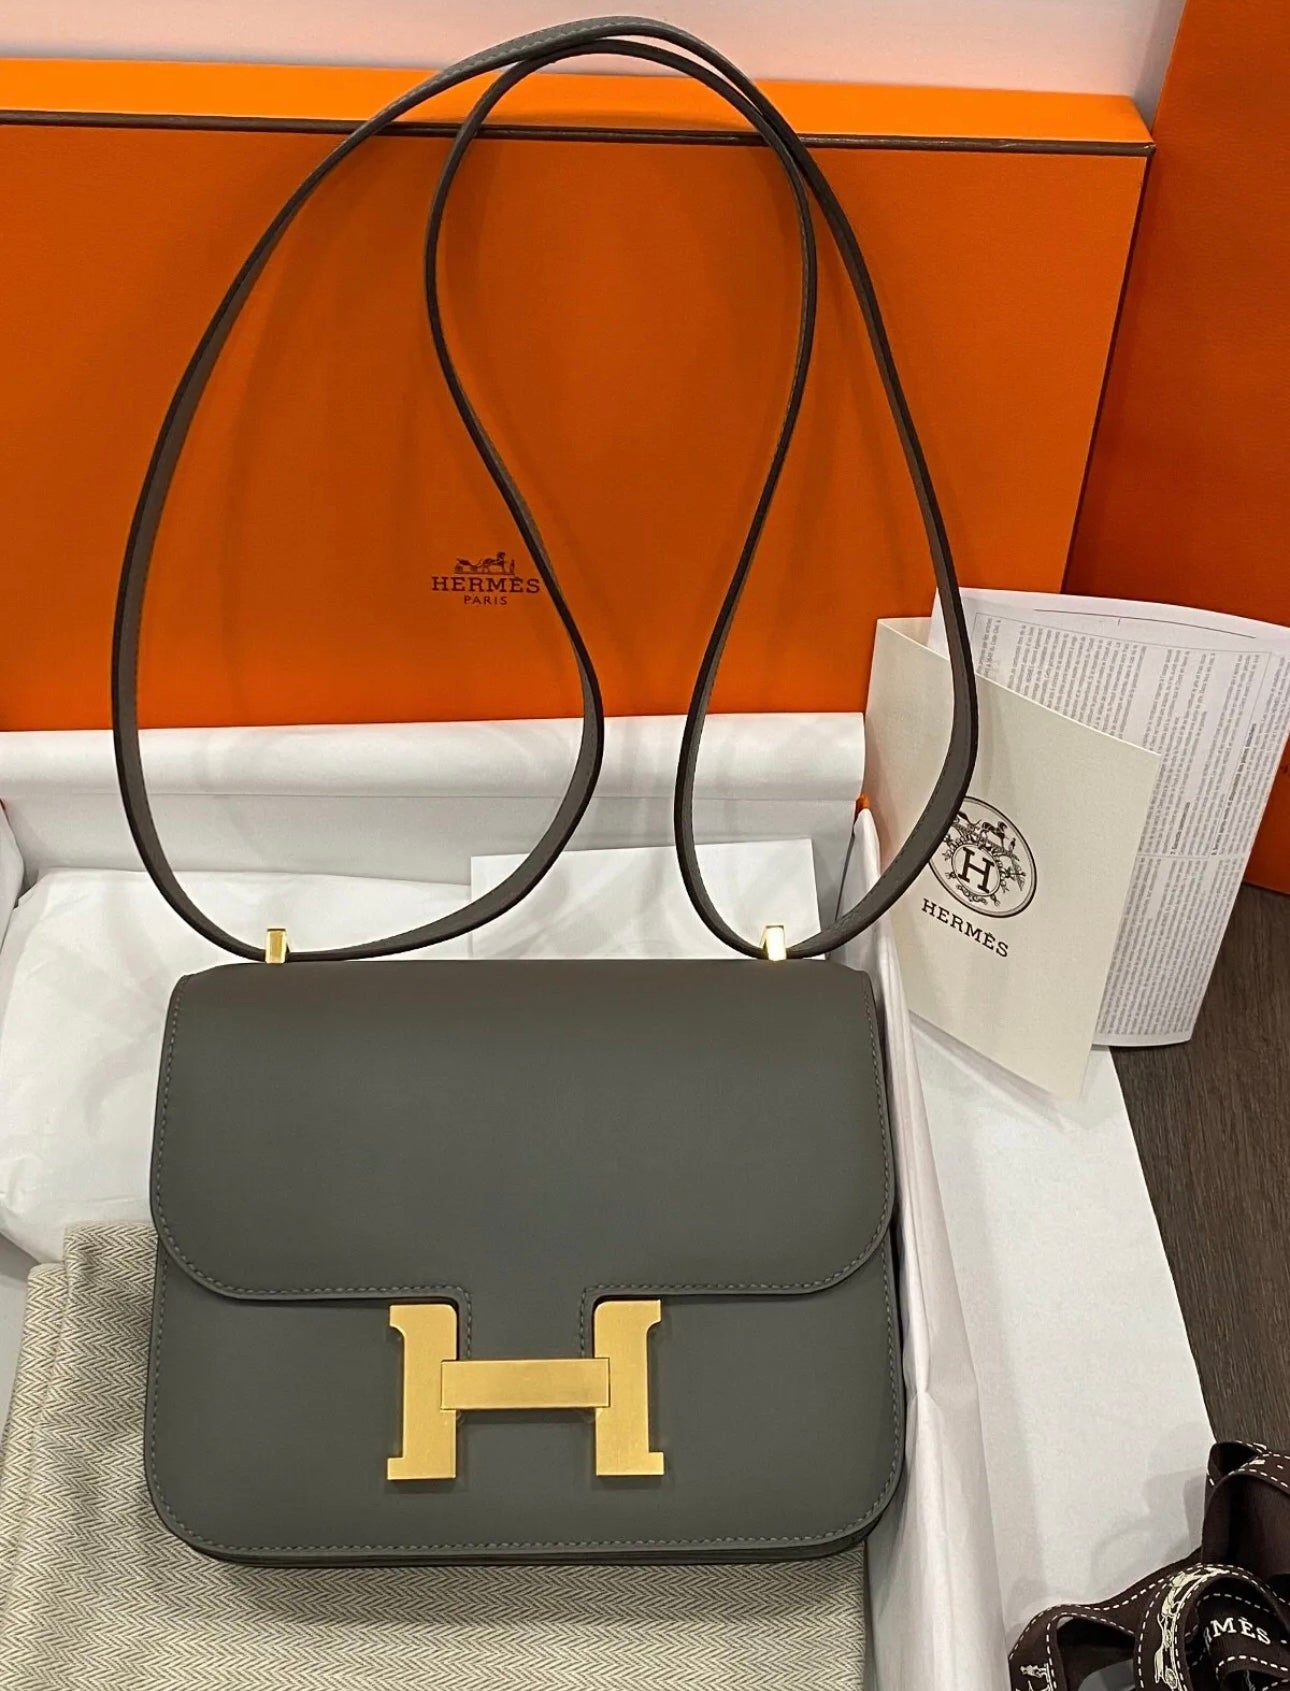 Two Hermes Bags in Gris Meyer (new color)